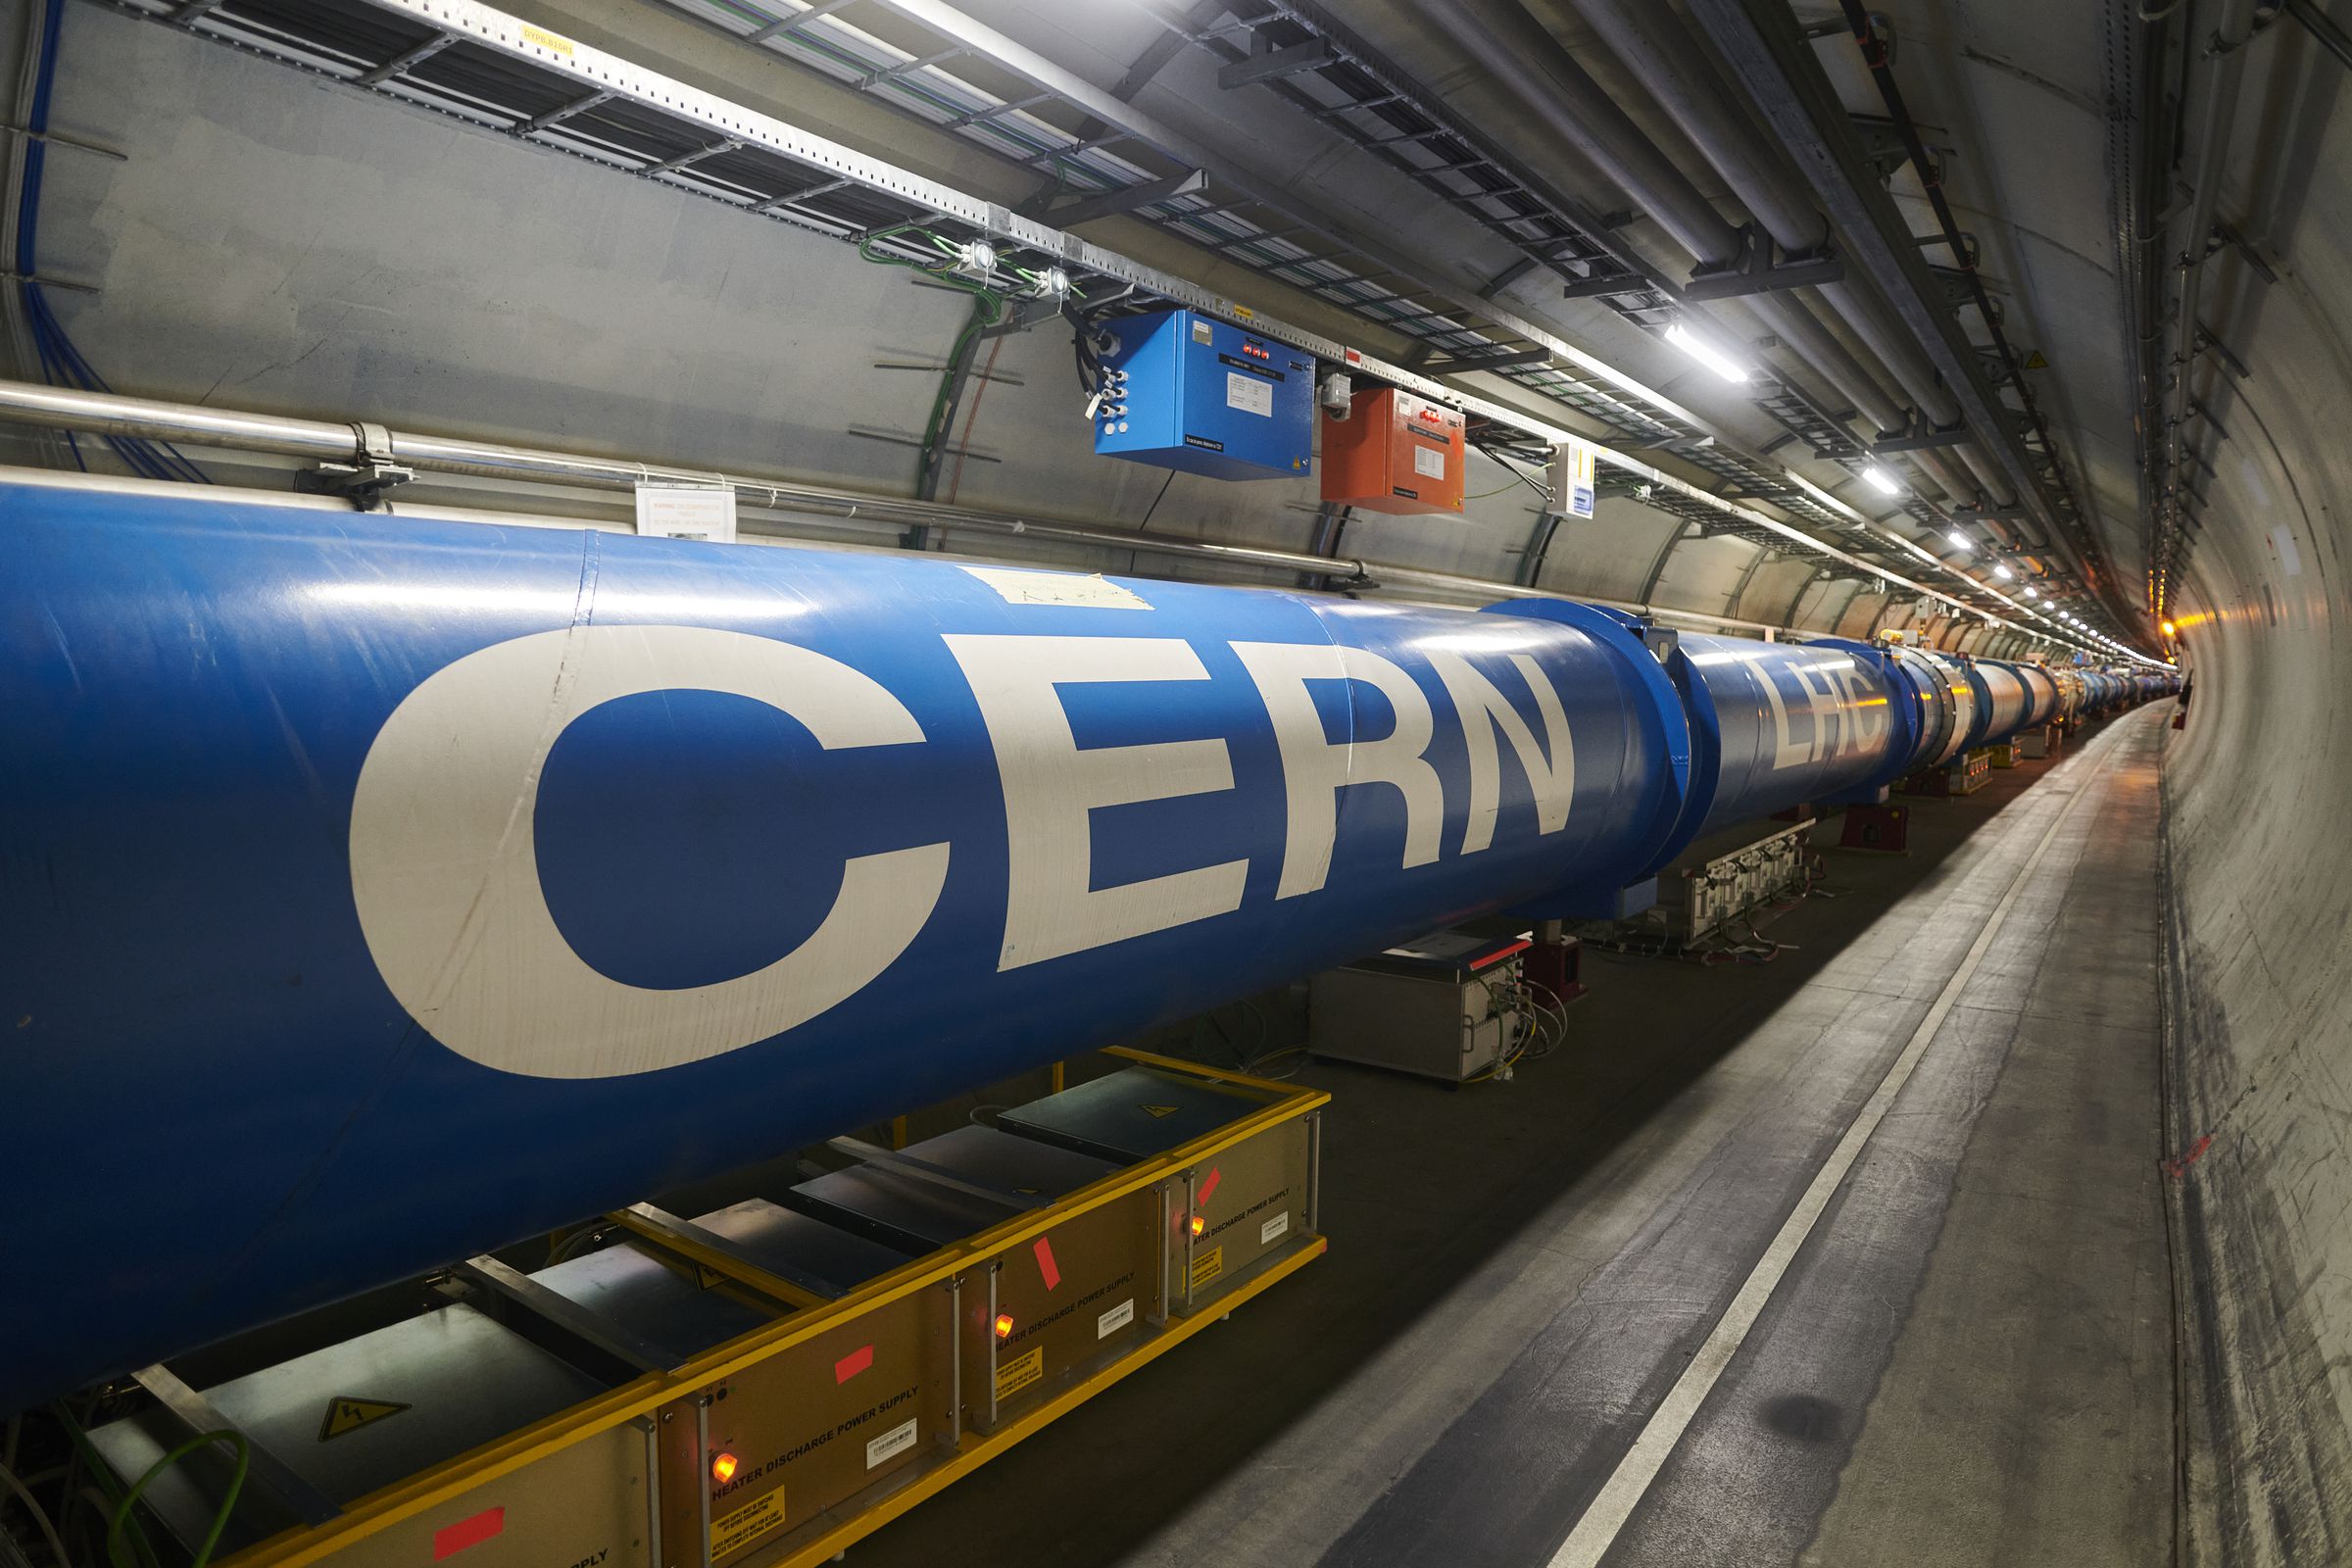 The Large Hadron Collider restarted after three years of upgrades.